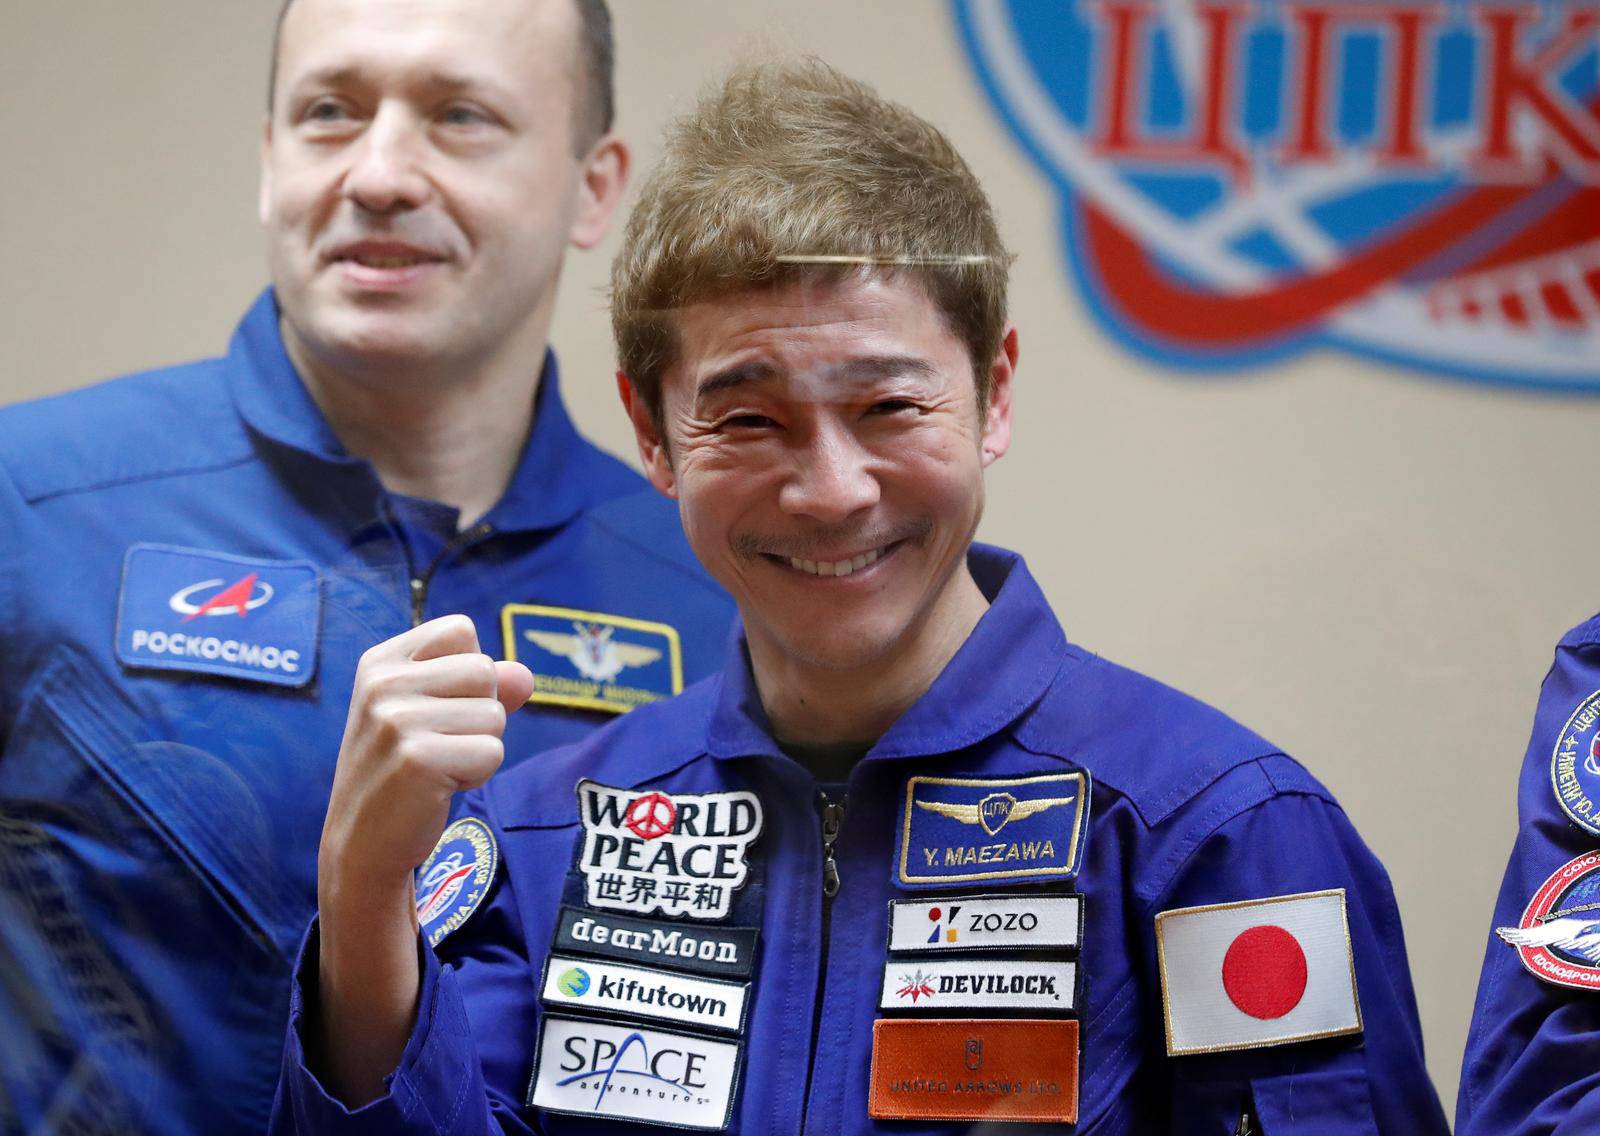 Space flight participant Yusaku Maezawa attends a meeting of the State Commission in Baikonur